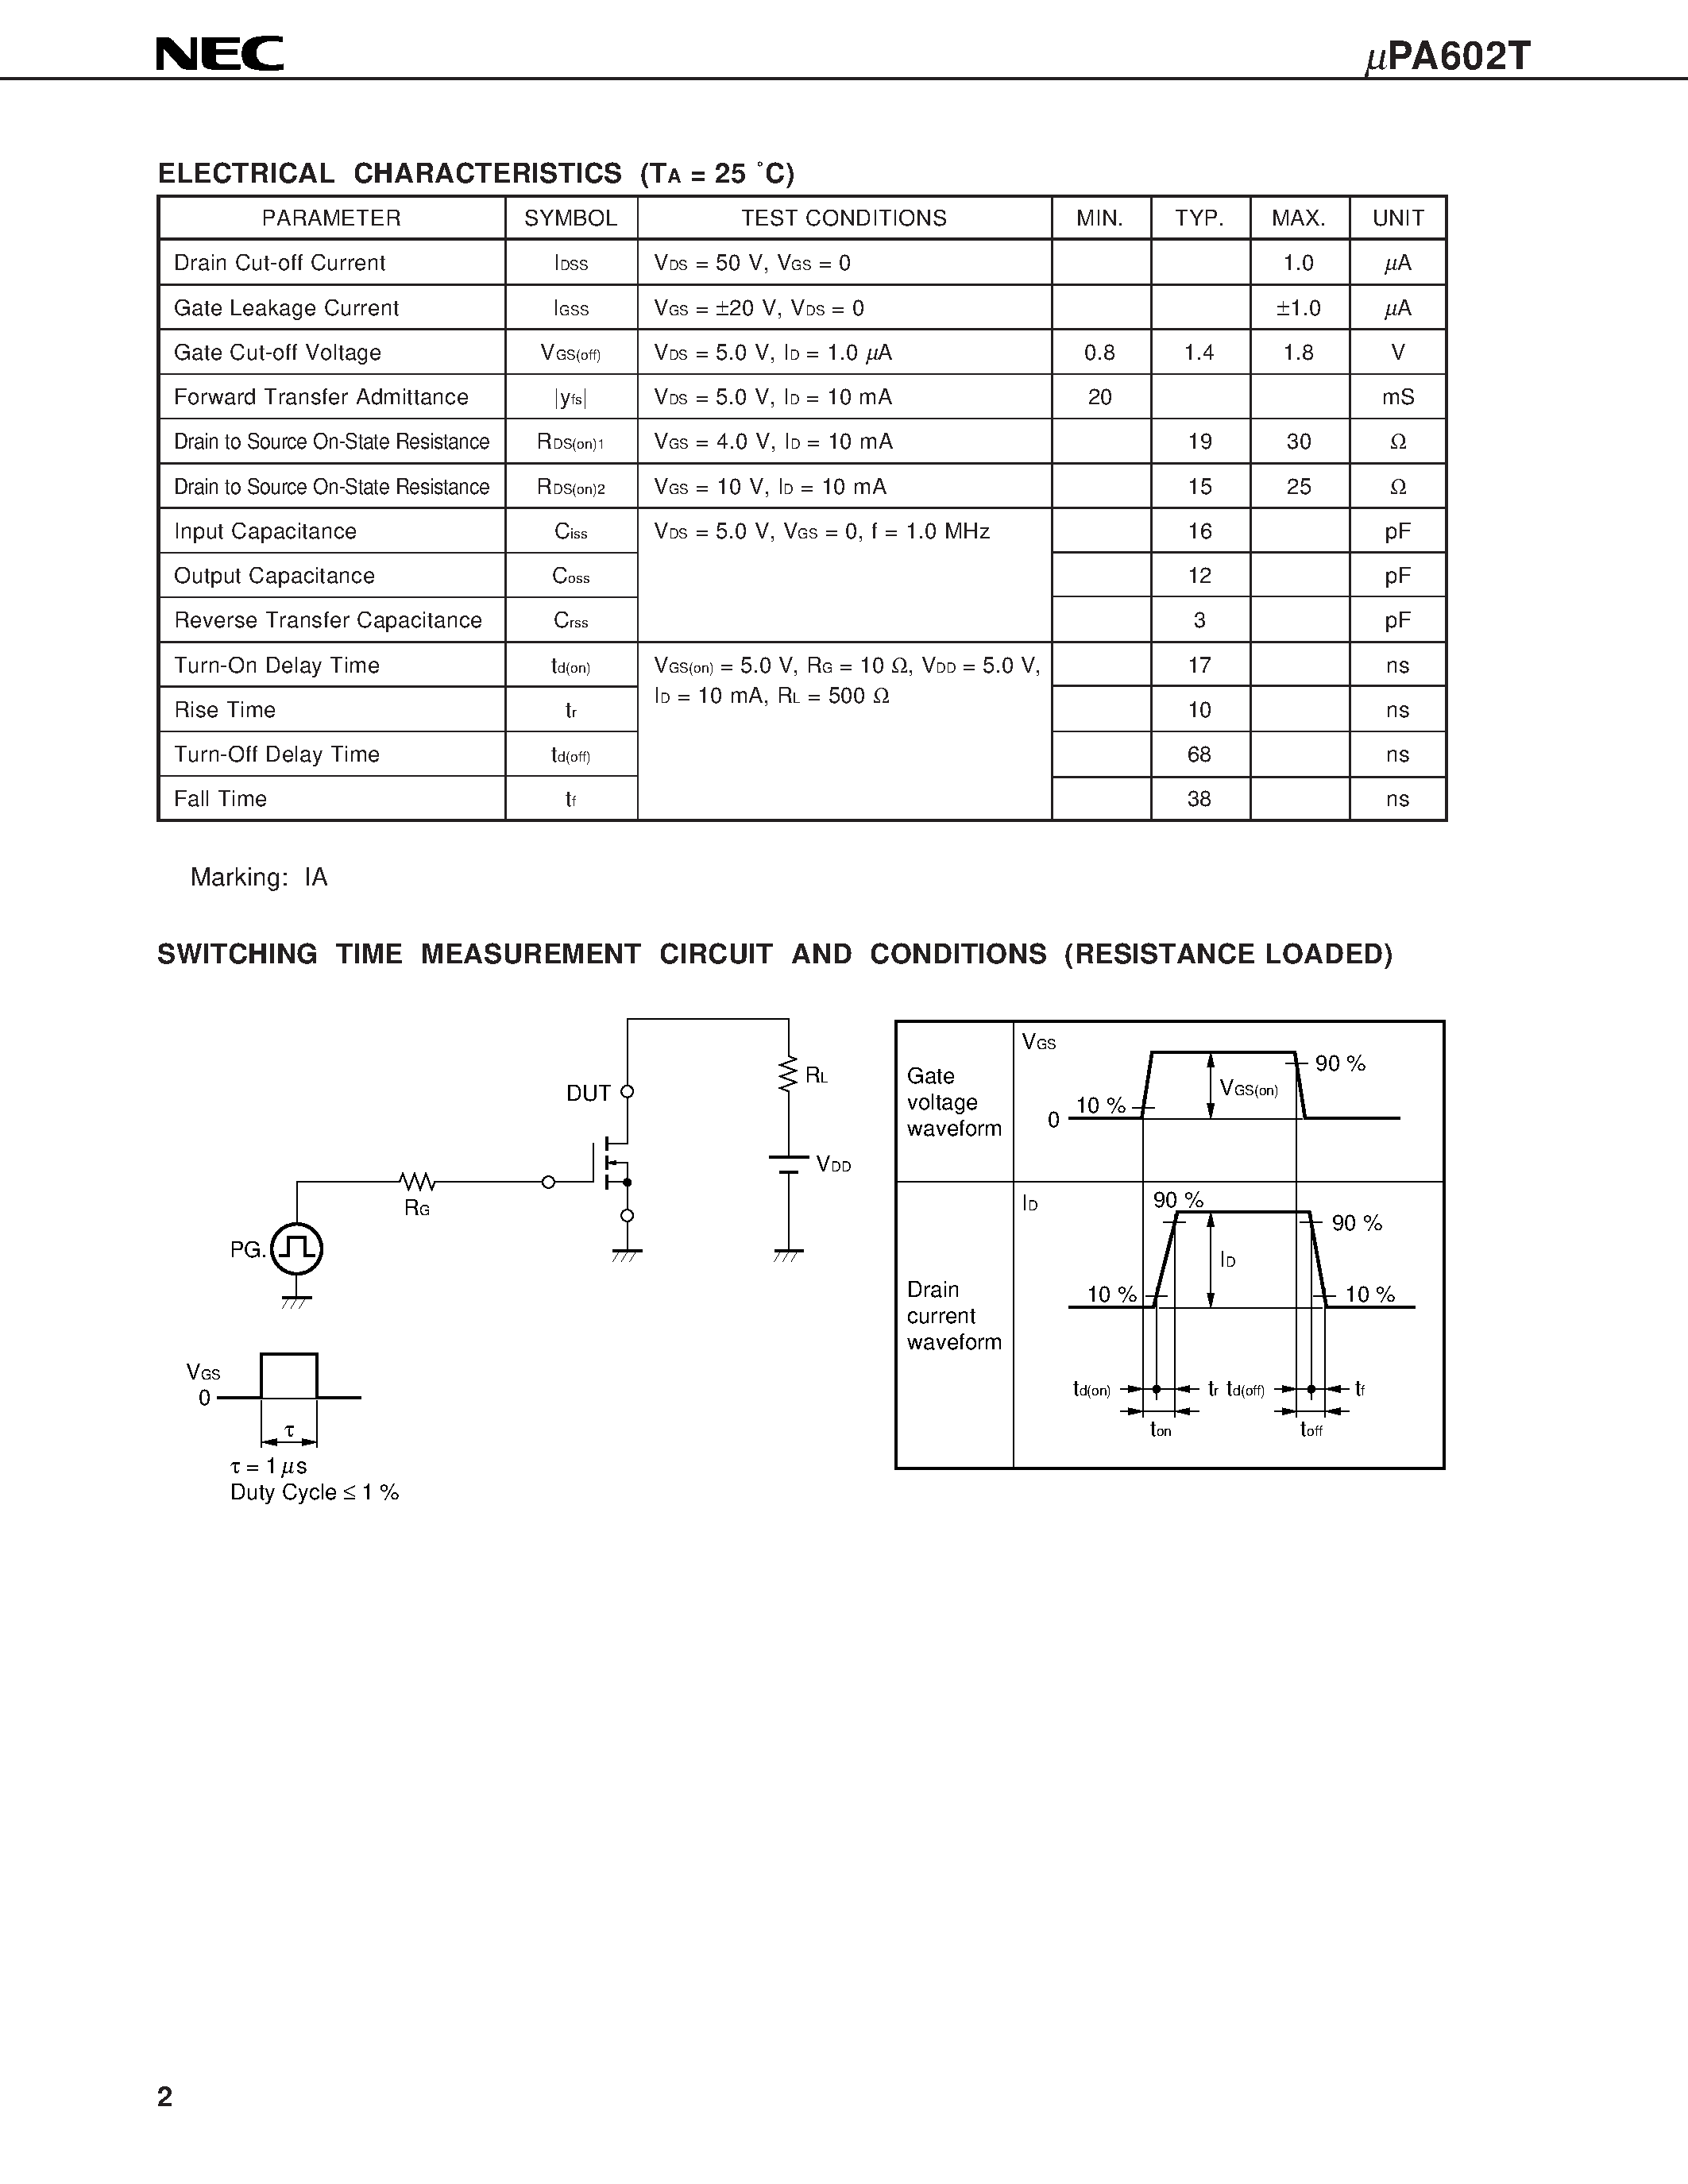 Datasheet UPA602T - N-CHANNEL MOS FET 6-PIN 2 CIRCUITS page 2